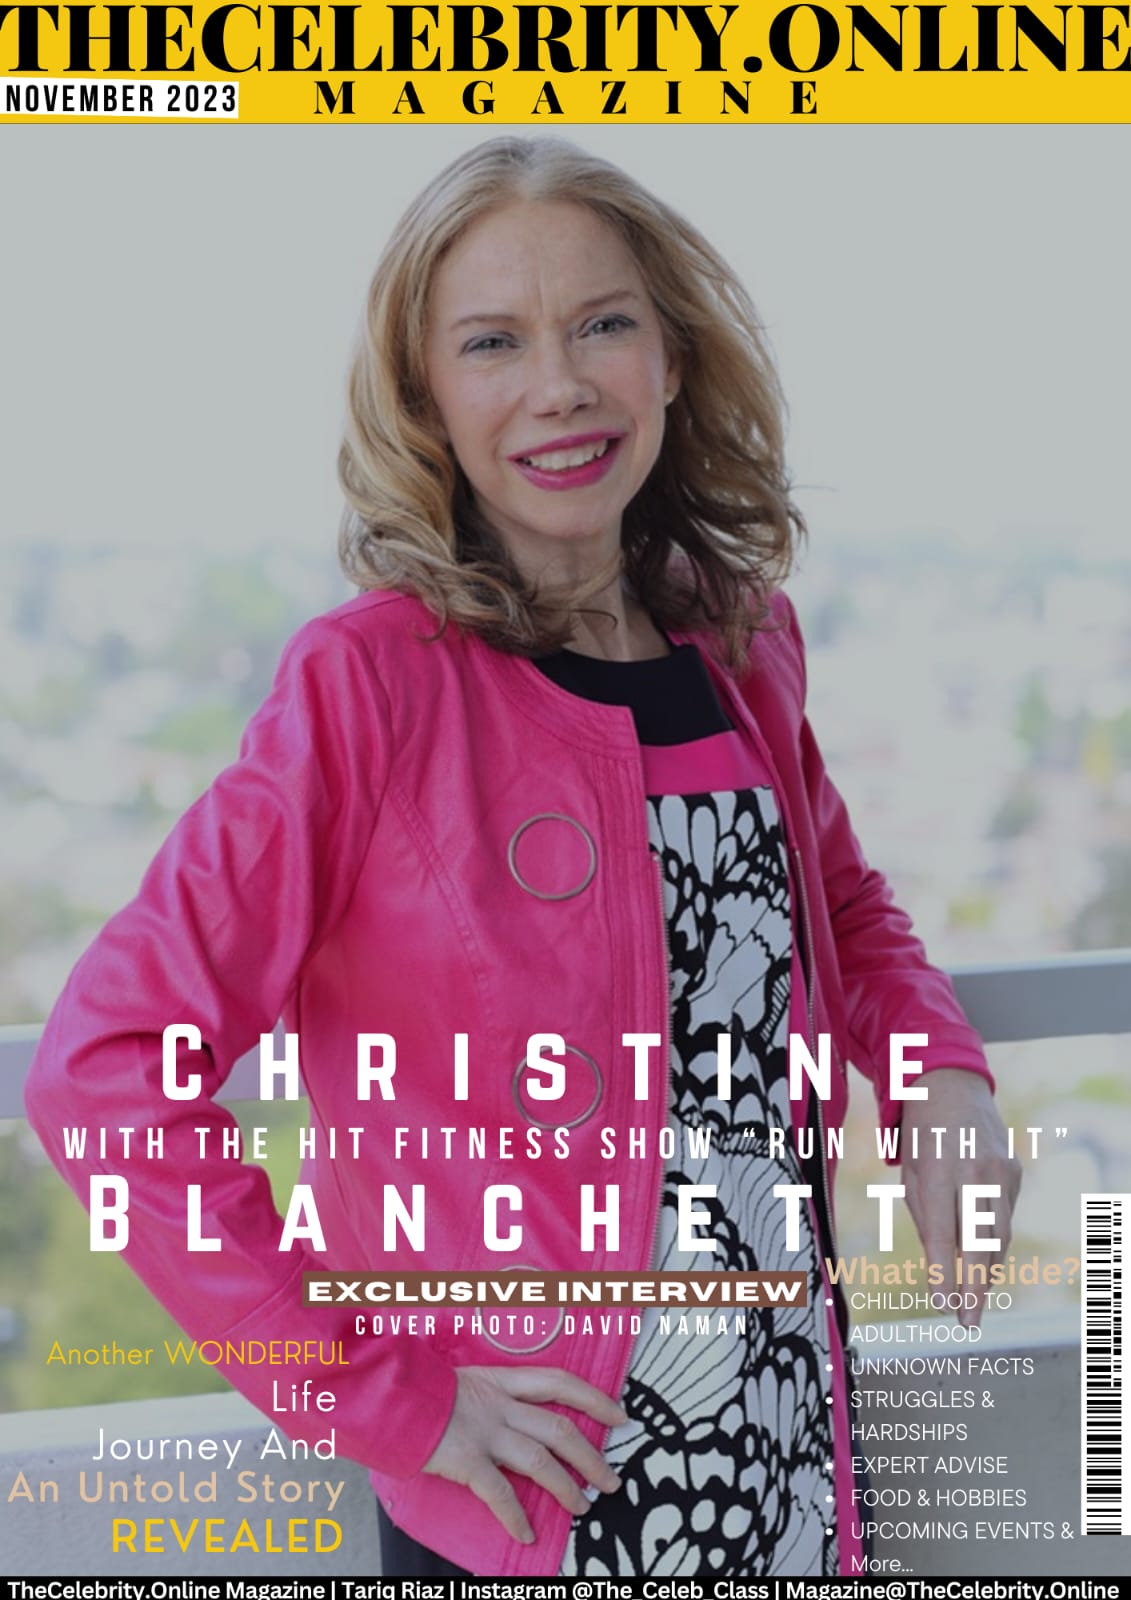 Christine Blanchette with the Hit Fitness Show “Run With It” – Exclusive Interview